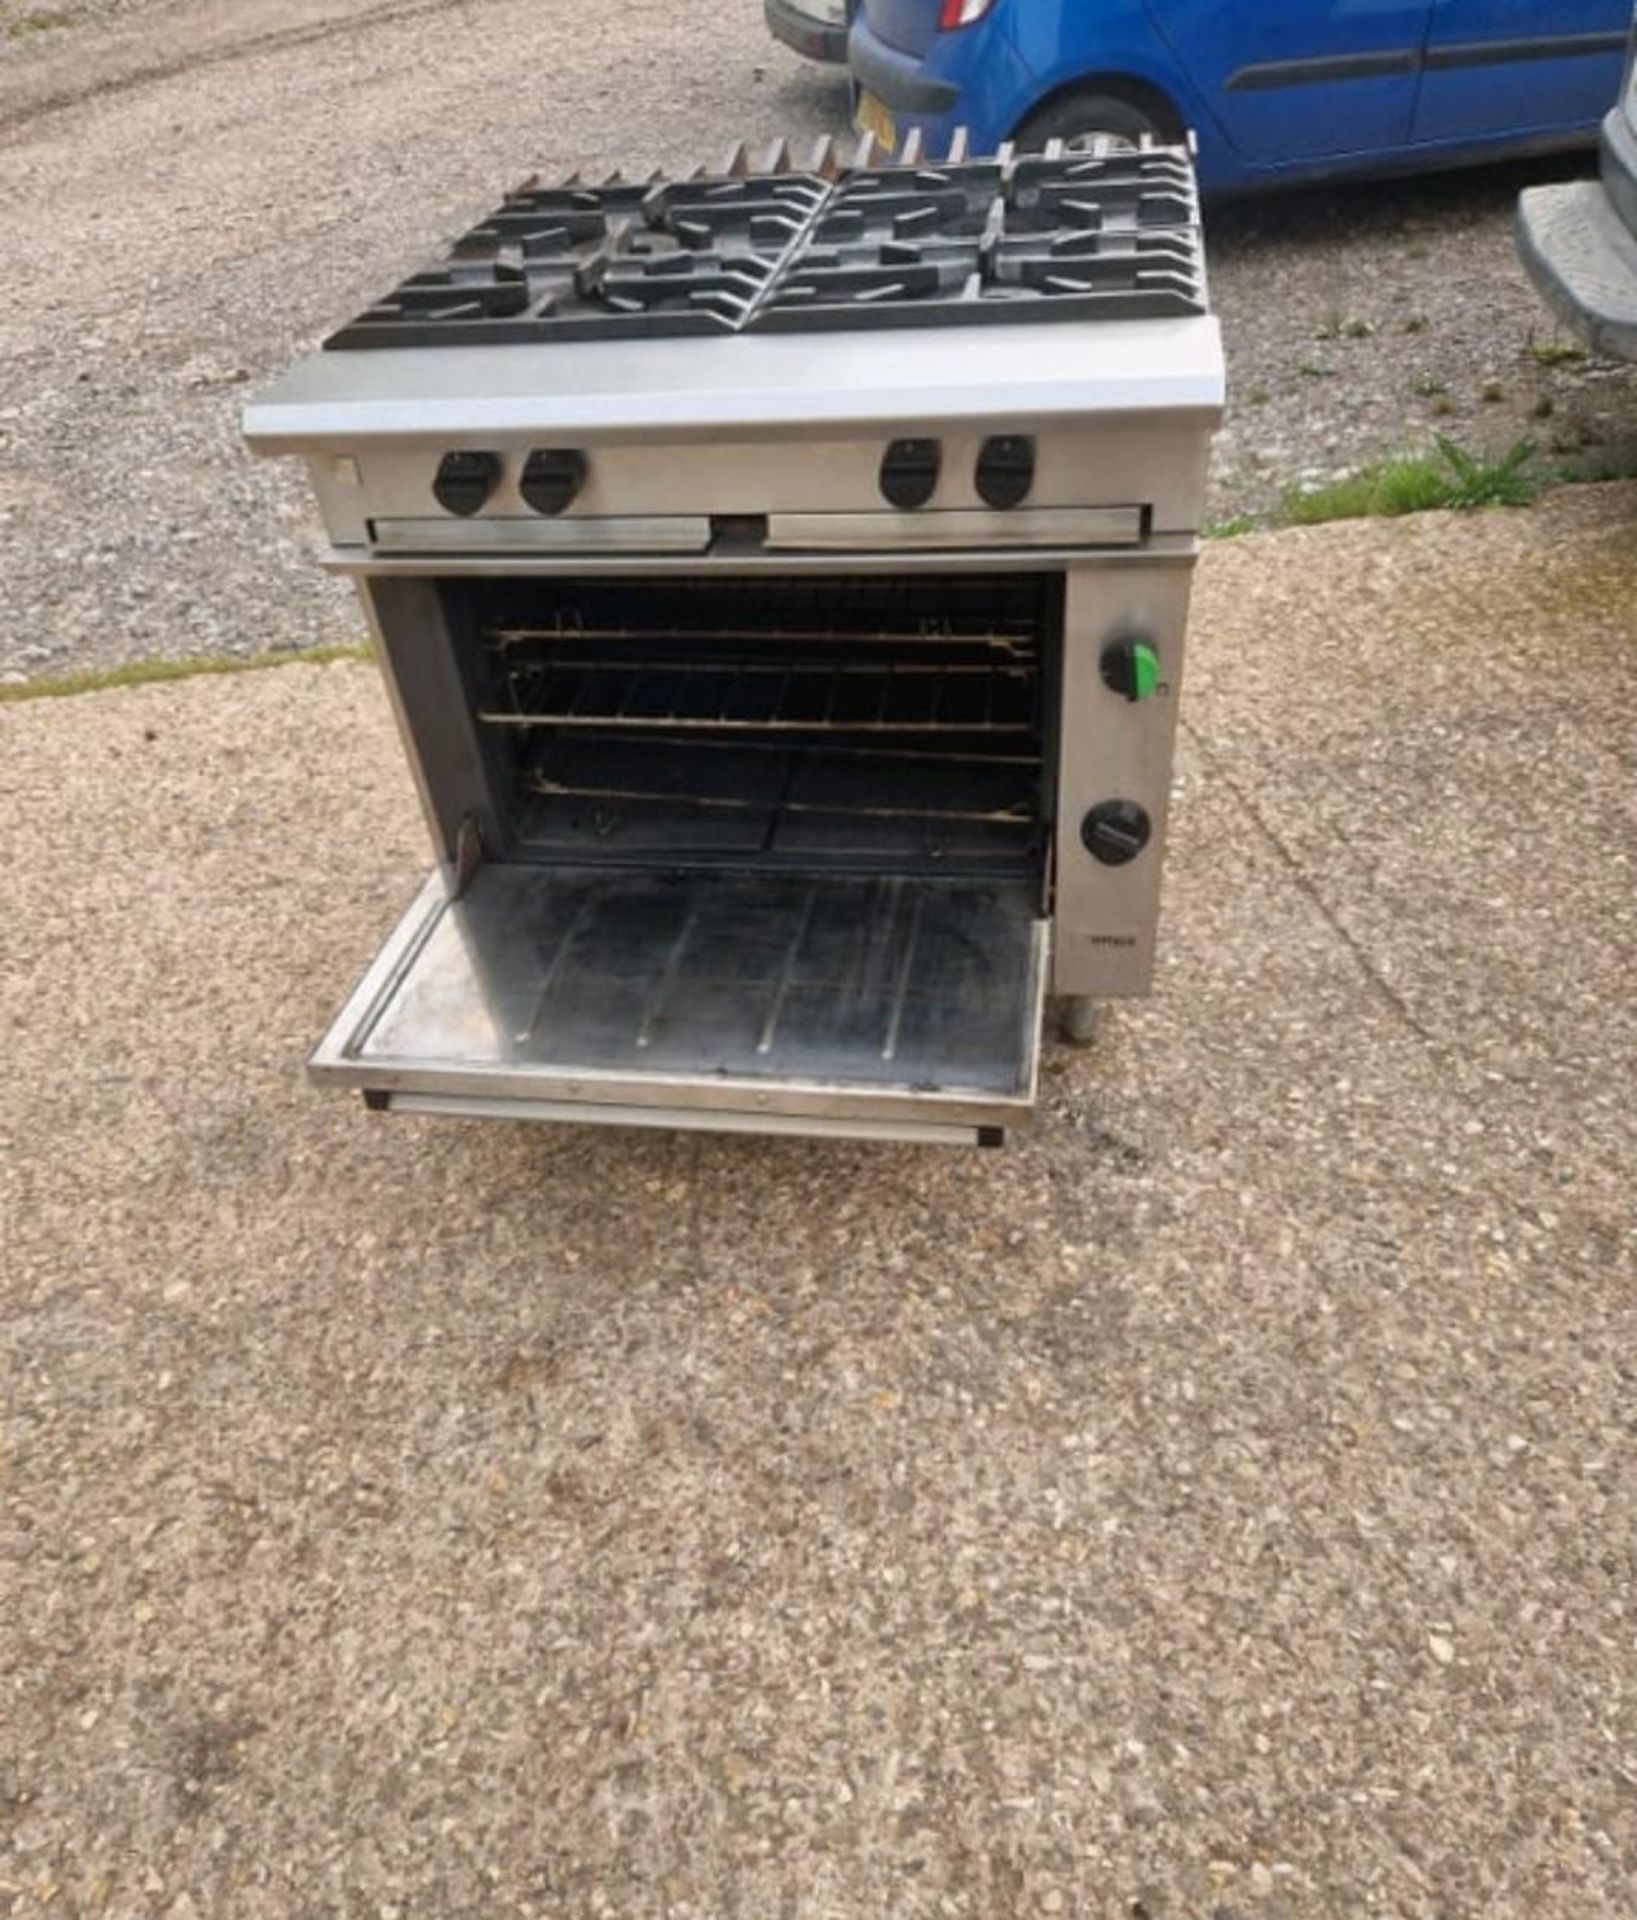 FALCON CHITAIN 4 BURNER COOKER WITH OVEN - Image 3 of 3